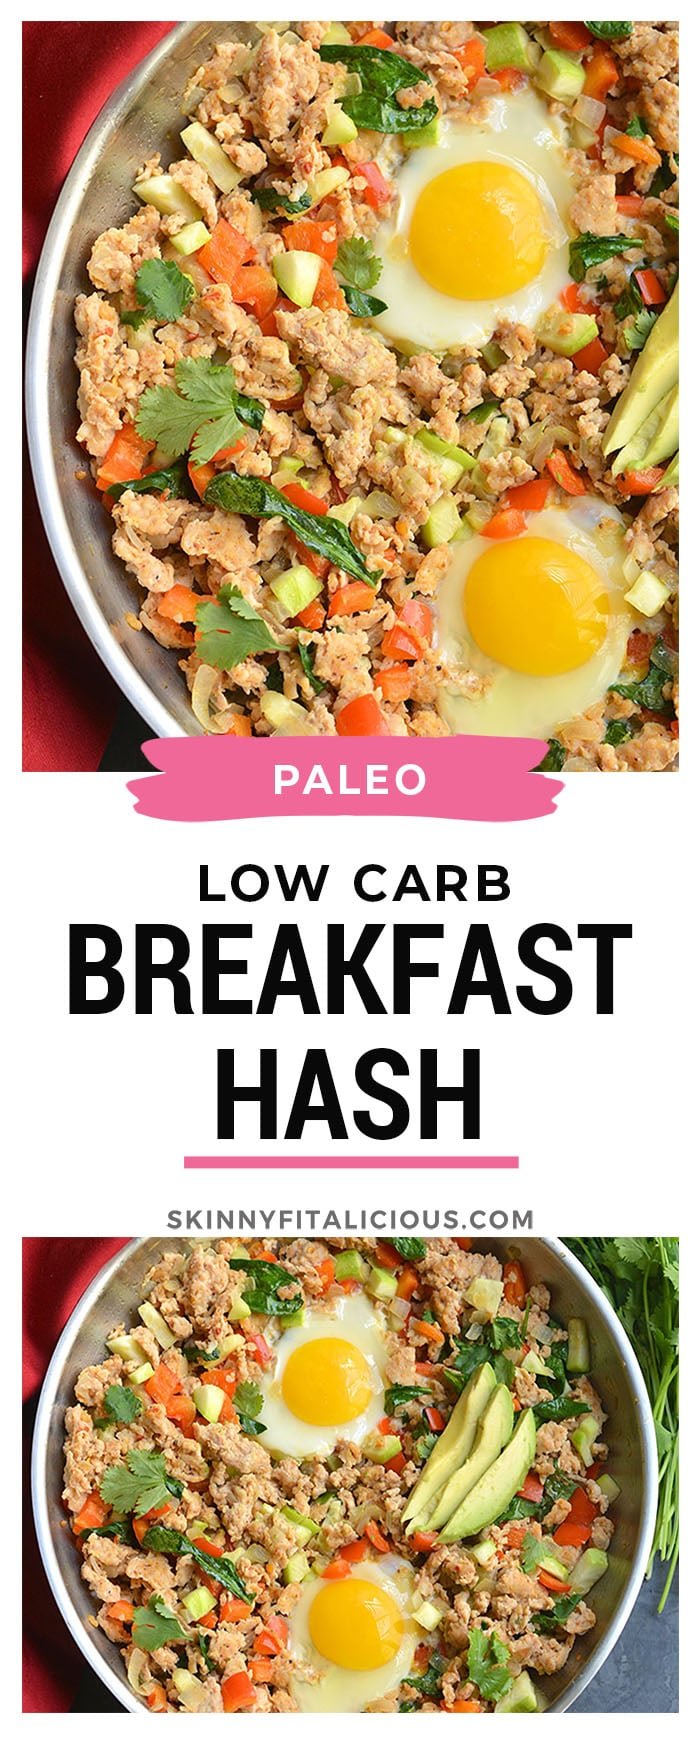 This Meal Prep Low Carb Breakfast Hash is loaded with turkey, spices and tons of veggies. A high protein, fiber rich meal to start the day. Serve with a crispy fried egg on top or boiled eggs for an EASY brunch or breakfast meal prep. Paleo + Whole30 + Gluten Free + Low Calorie